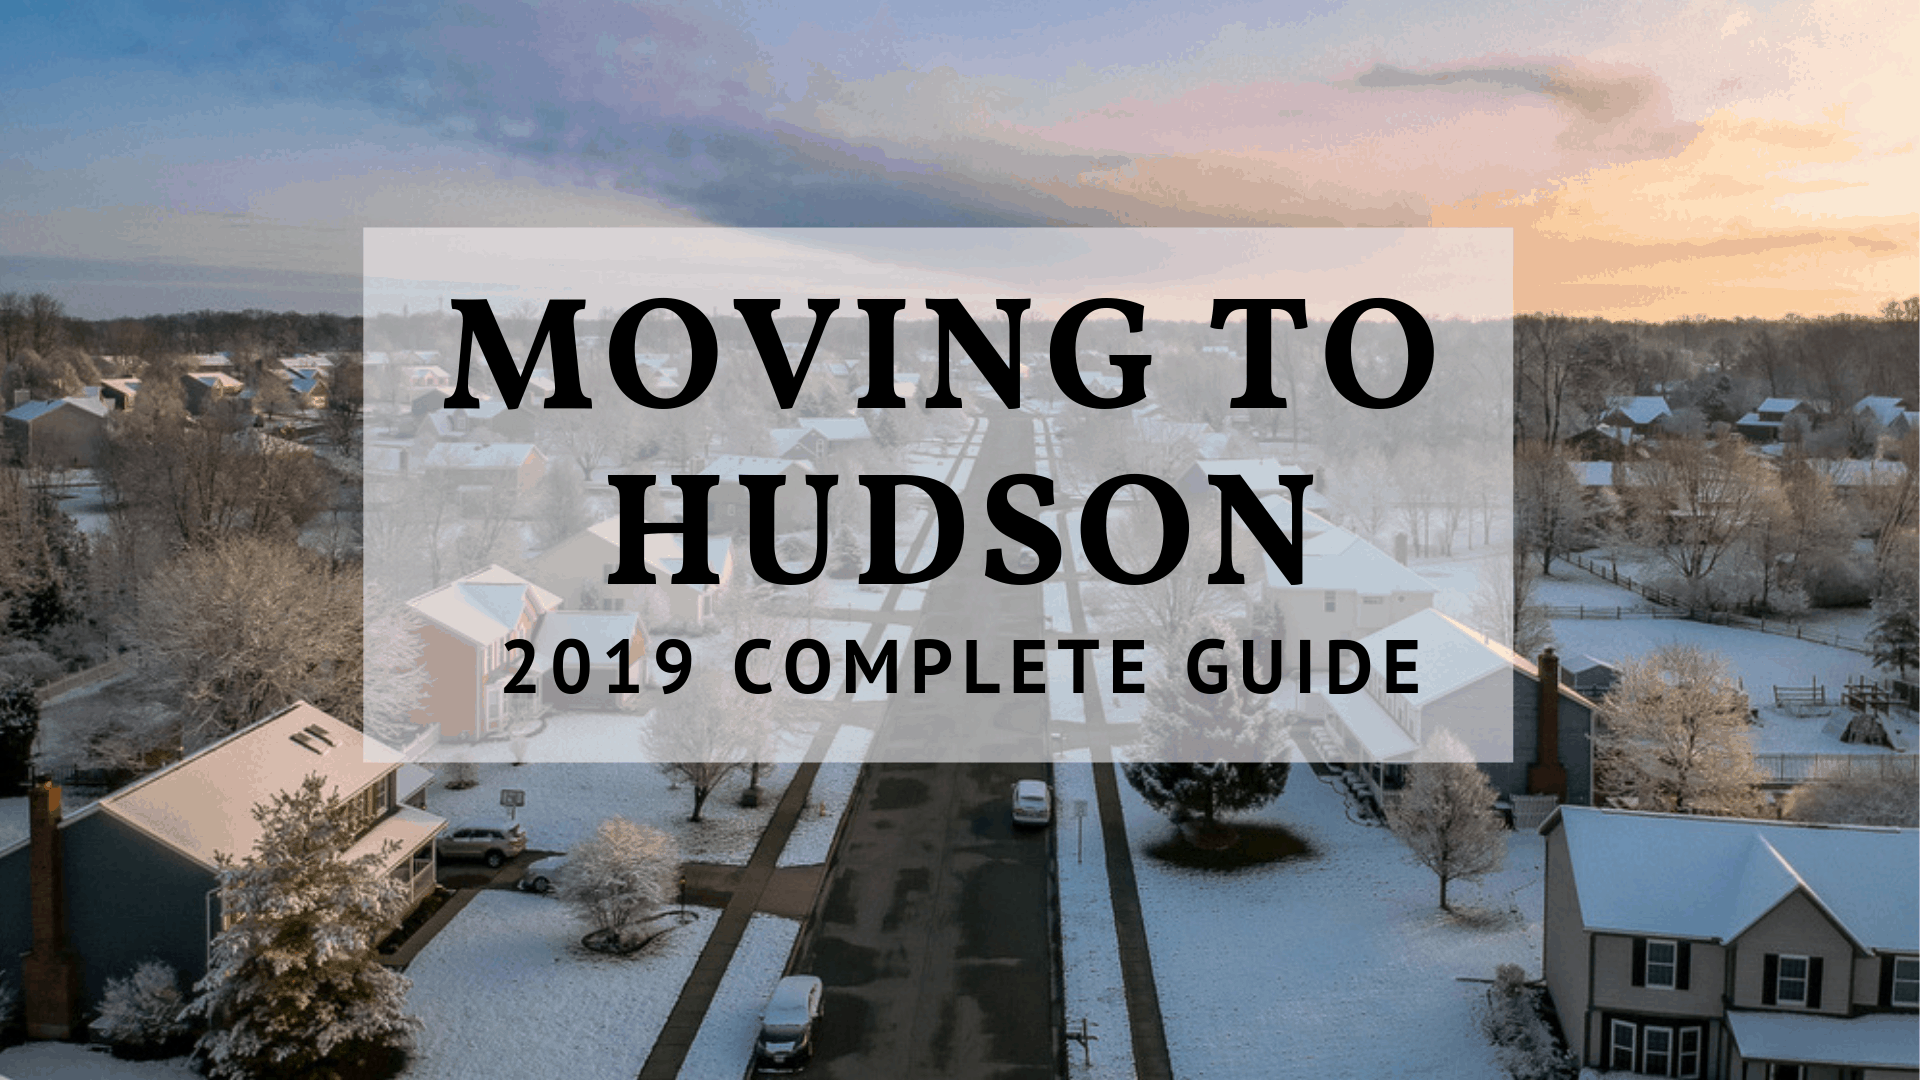 Moving to Hudson, OH - 2019 Complete Guide